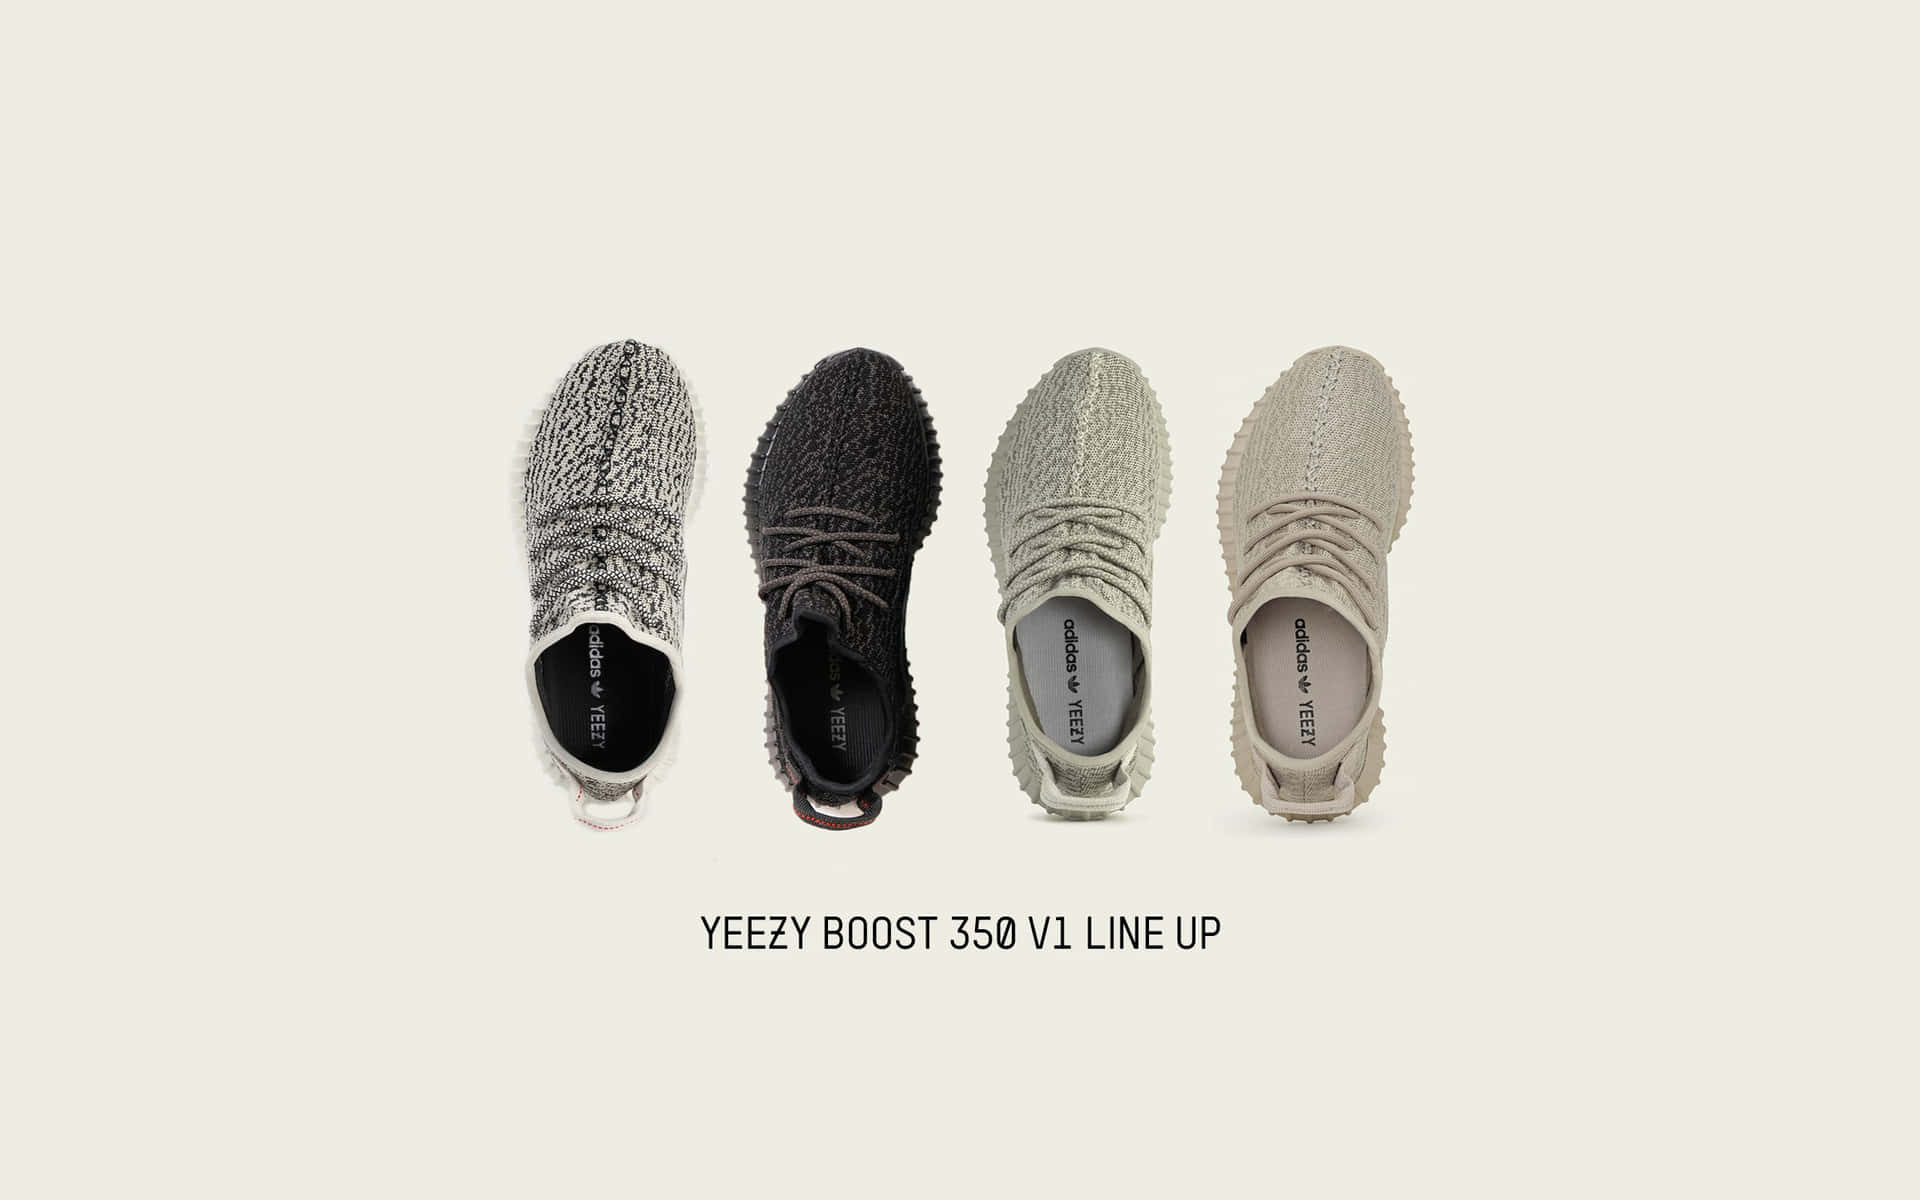 HD wallpaper Yeezy drop person dropping pair of zebra Adidas Yeezy Boost  350 V2 shoes  Wallpaper Flare